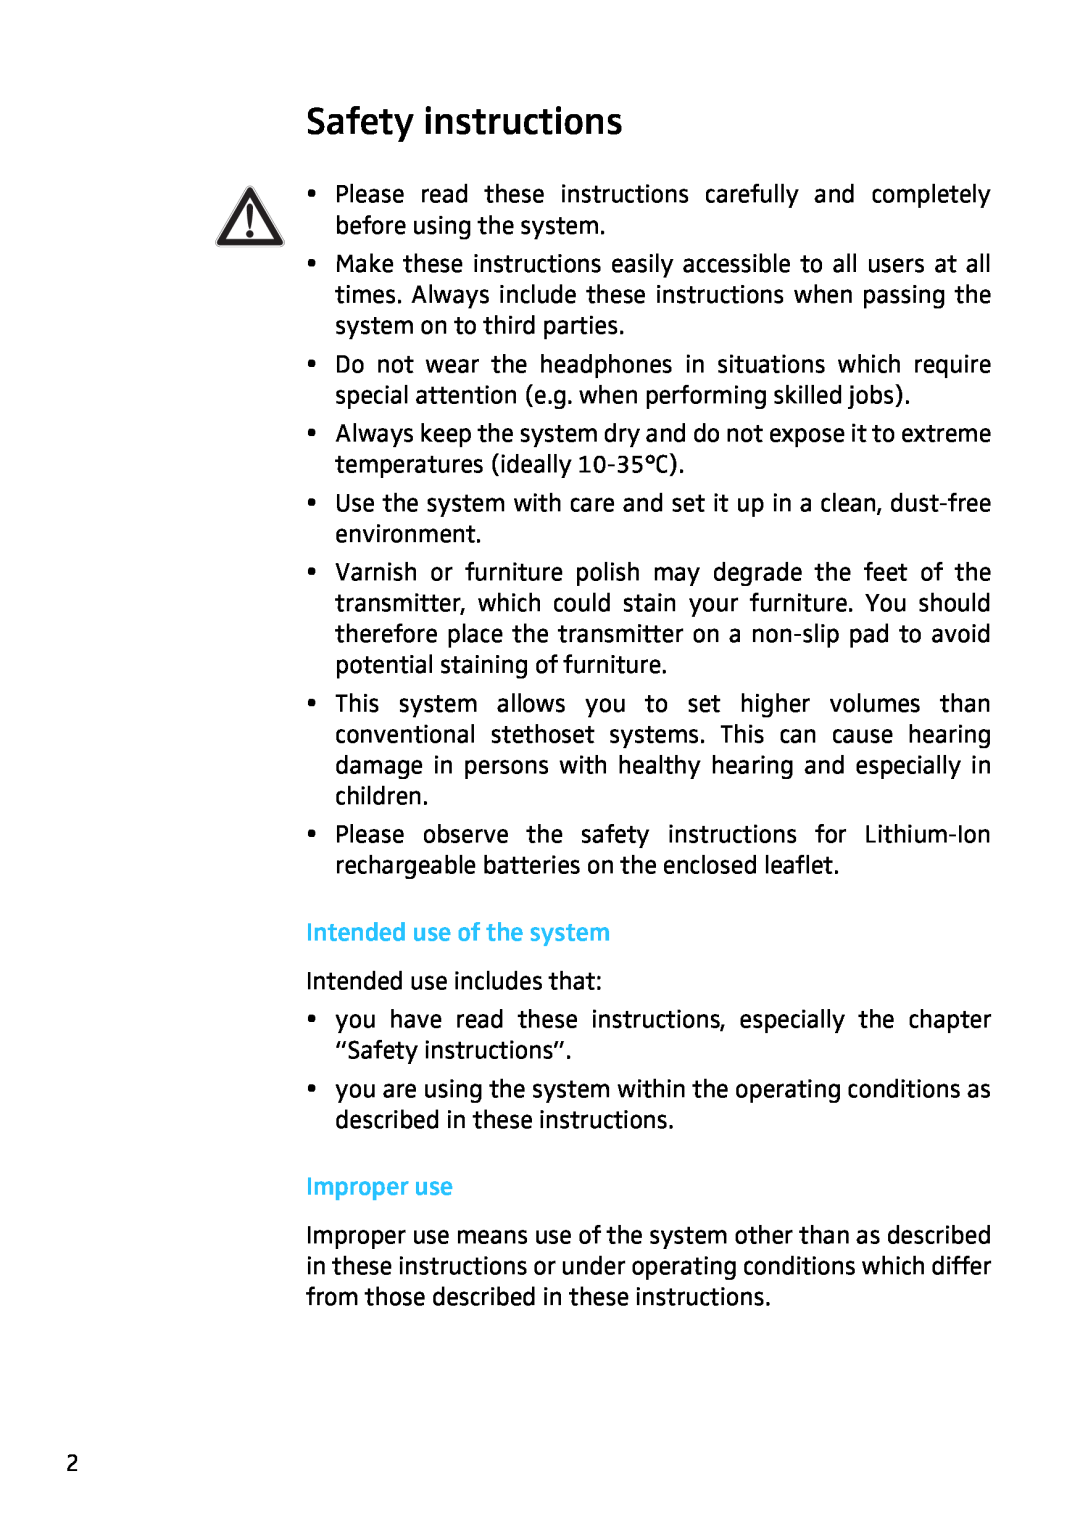 Sennheiser RS4200 manual Safety instructions, Intended use of the system, Improper use 